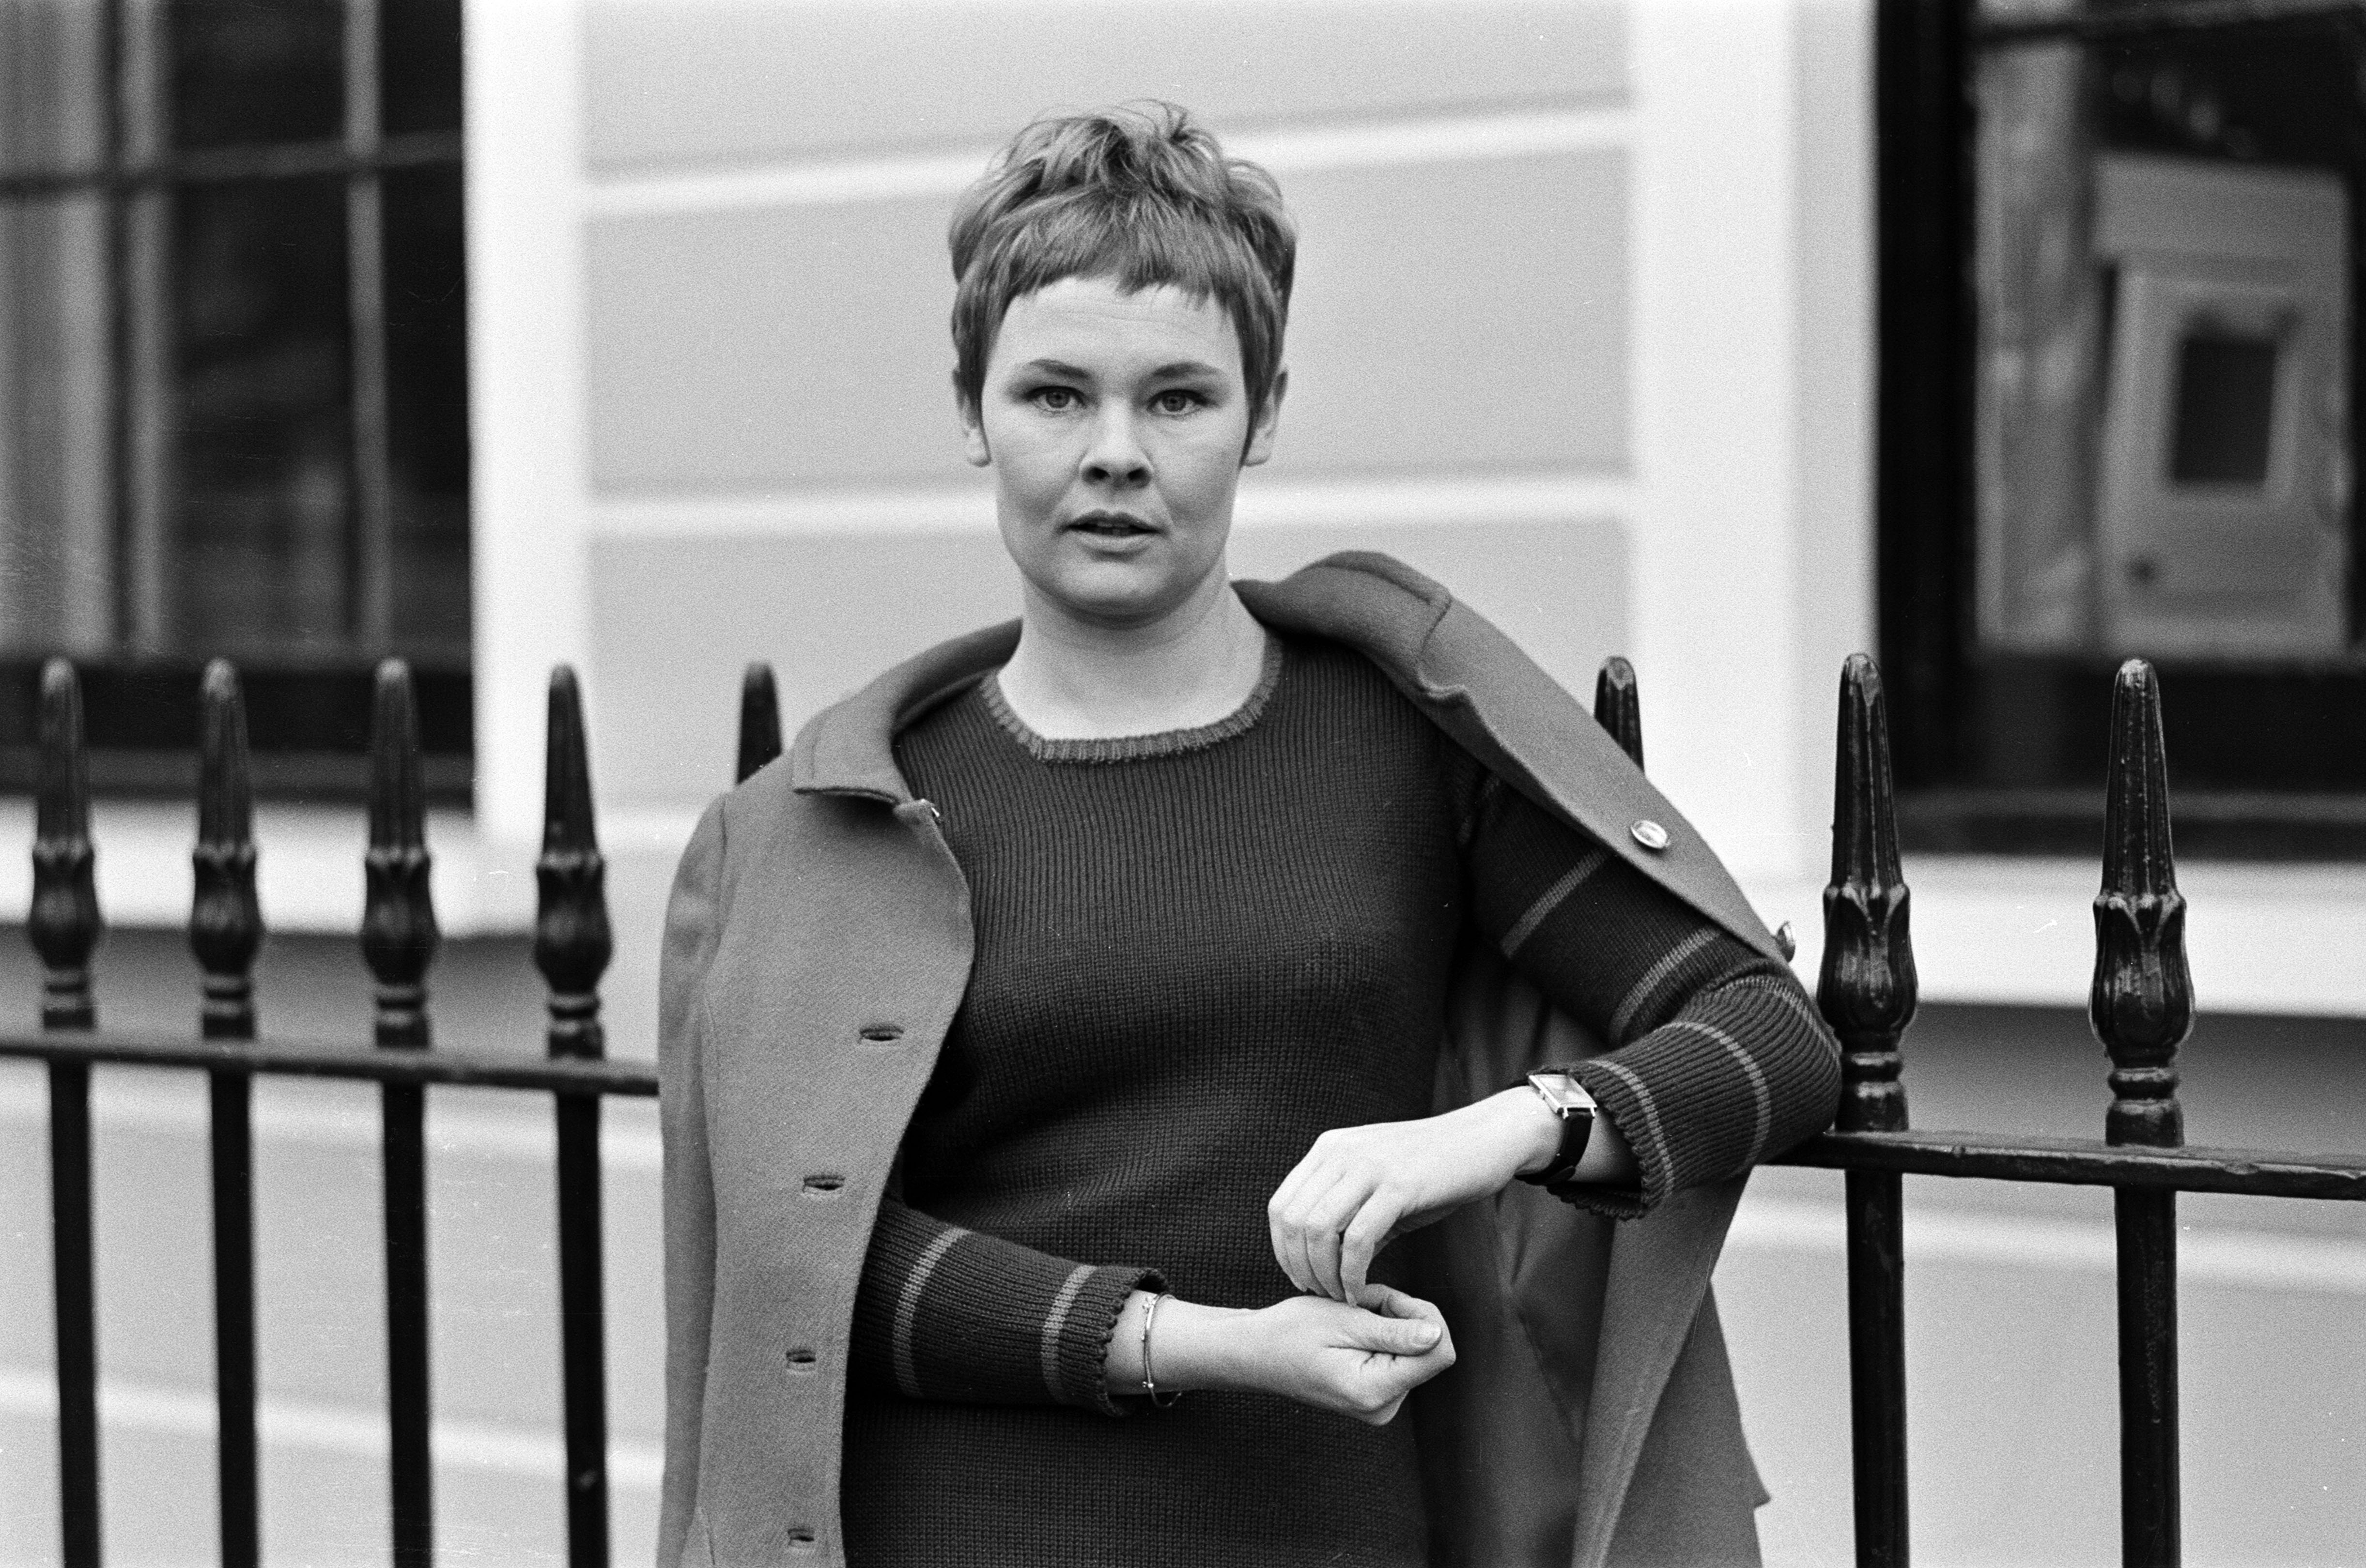 Actress Judi Dench at home, on November 17, 1967 | Source: Getty Images